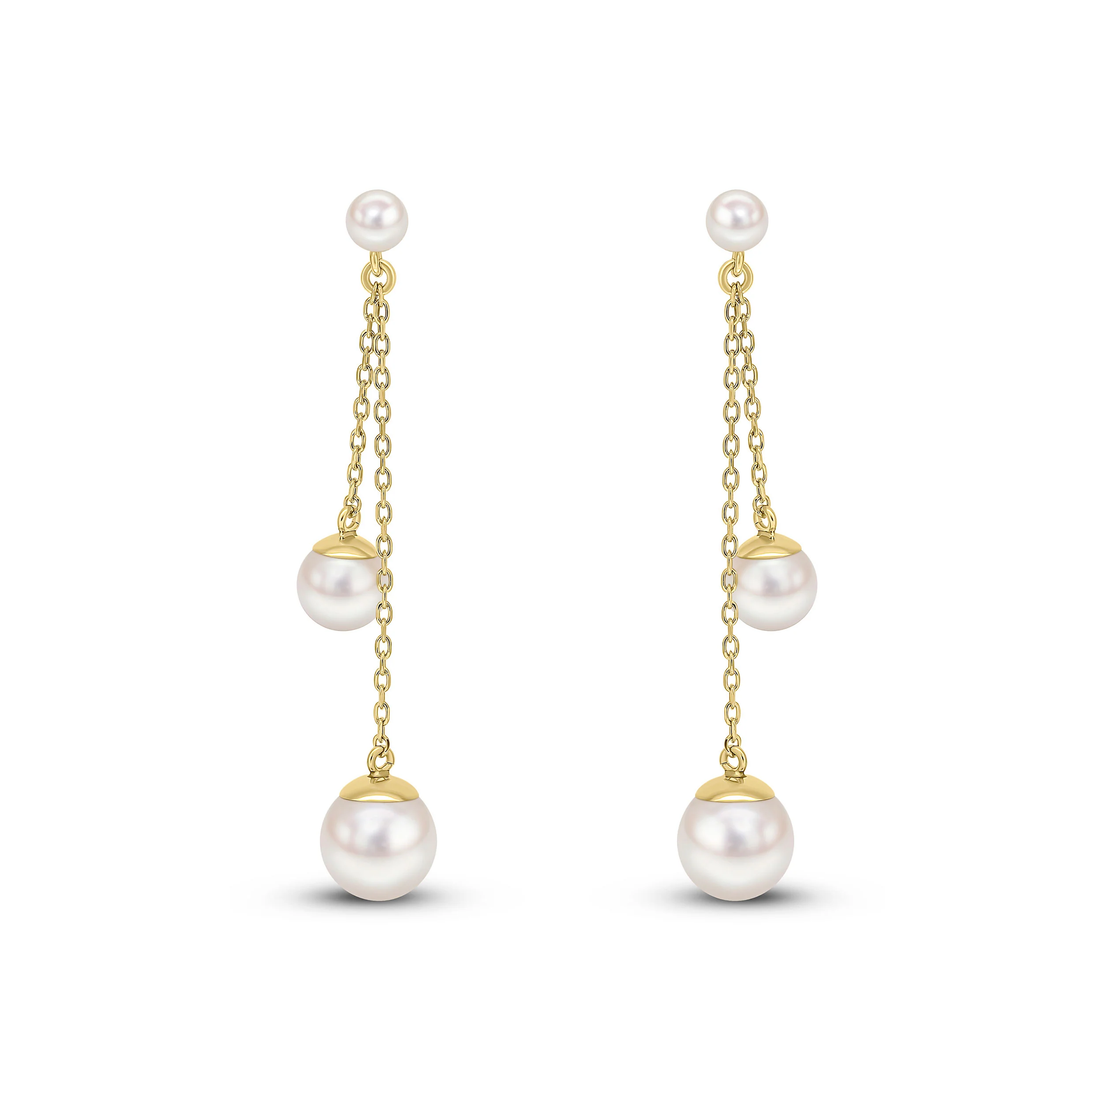 9CT Yellow Gold Chain Drop Earrings with 4mm, 6mm and 8mm Pearls - Robert Anthony Jewellers, Edinburgh